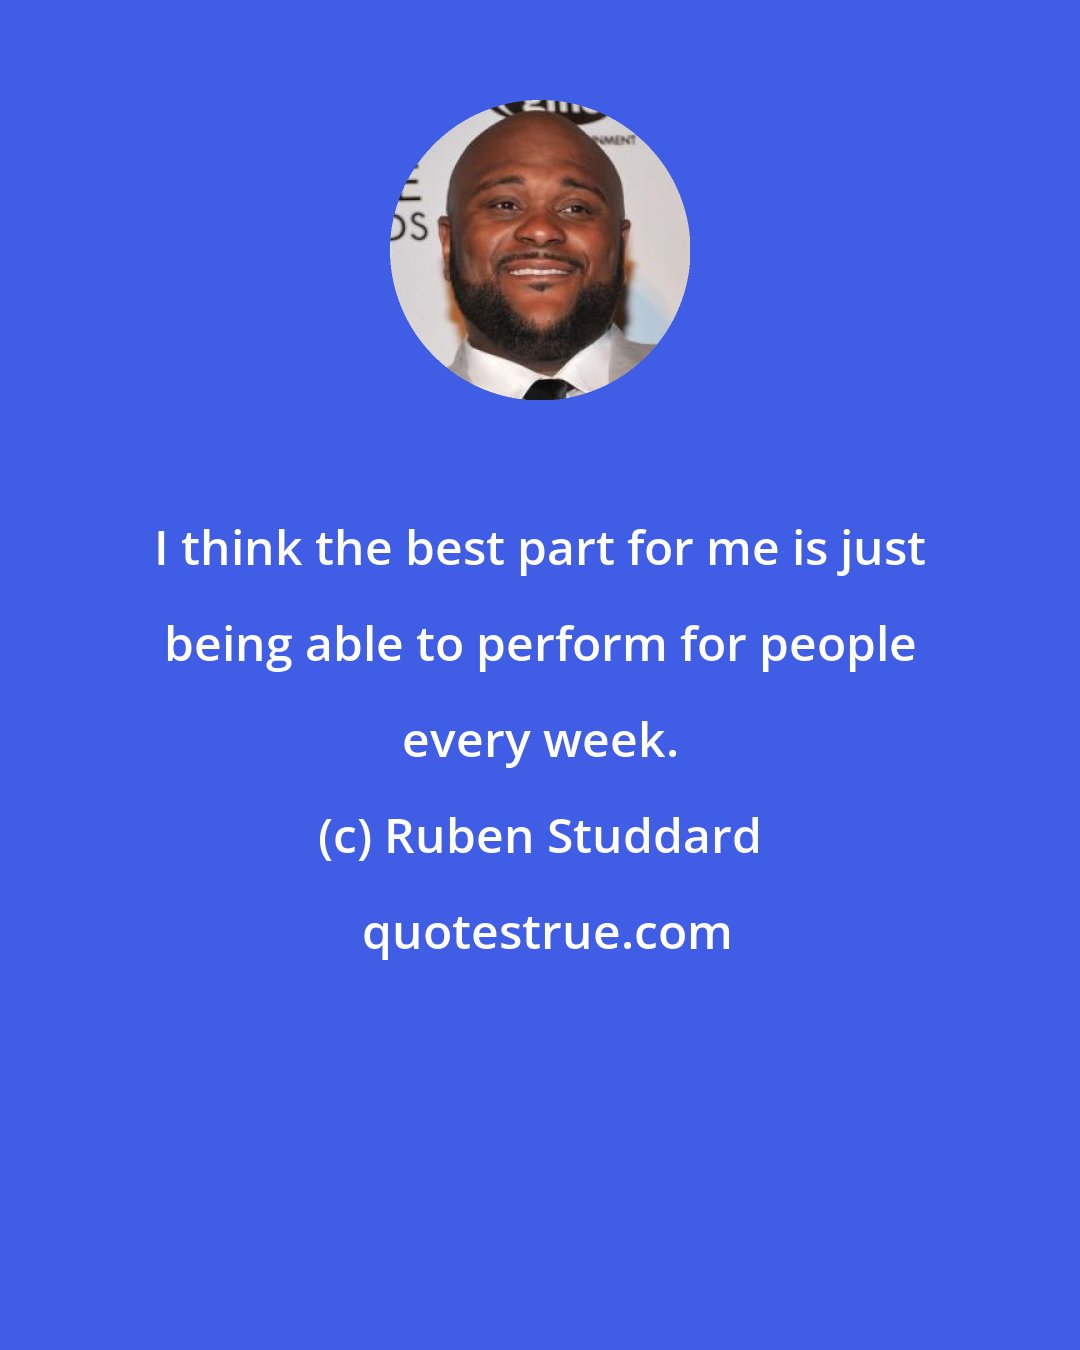 Ruben Studdard: I think the best part for me is just being able to perform for people every week.